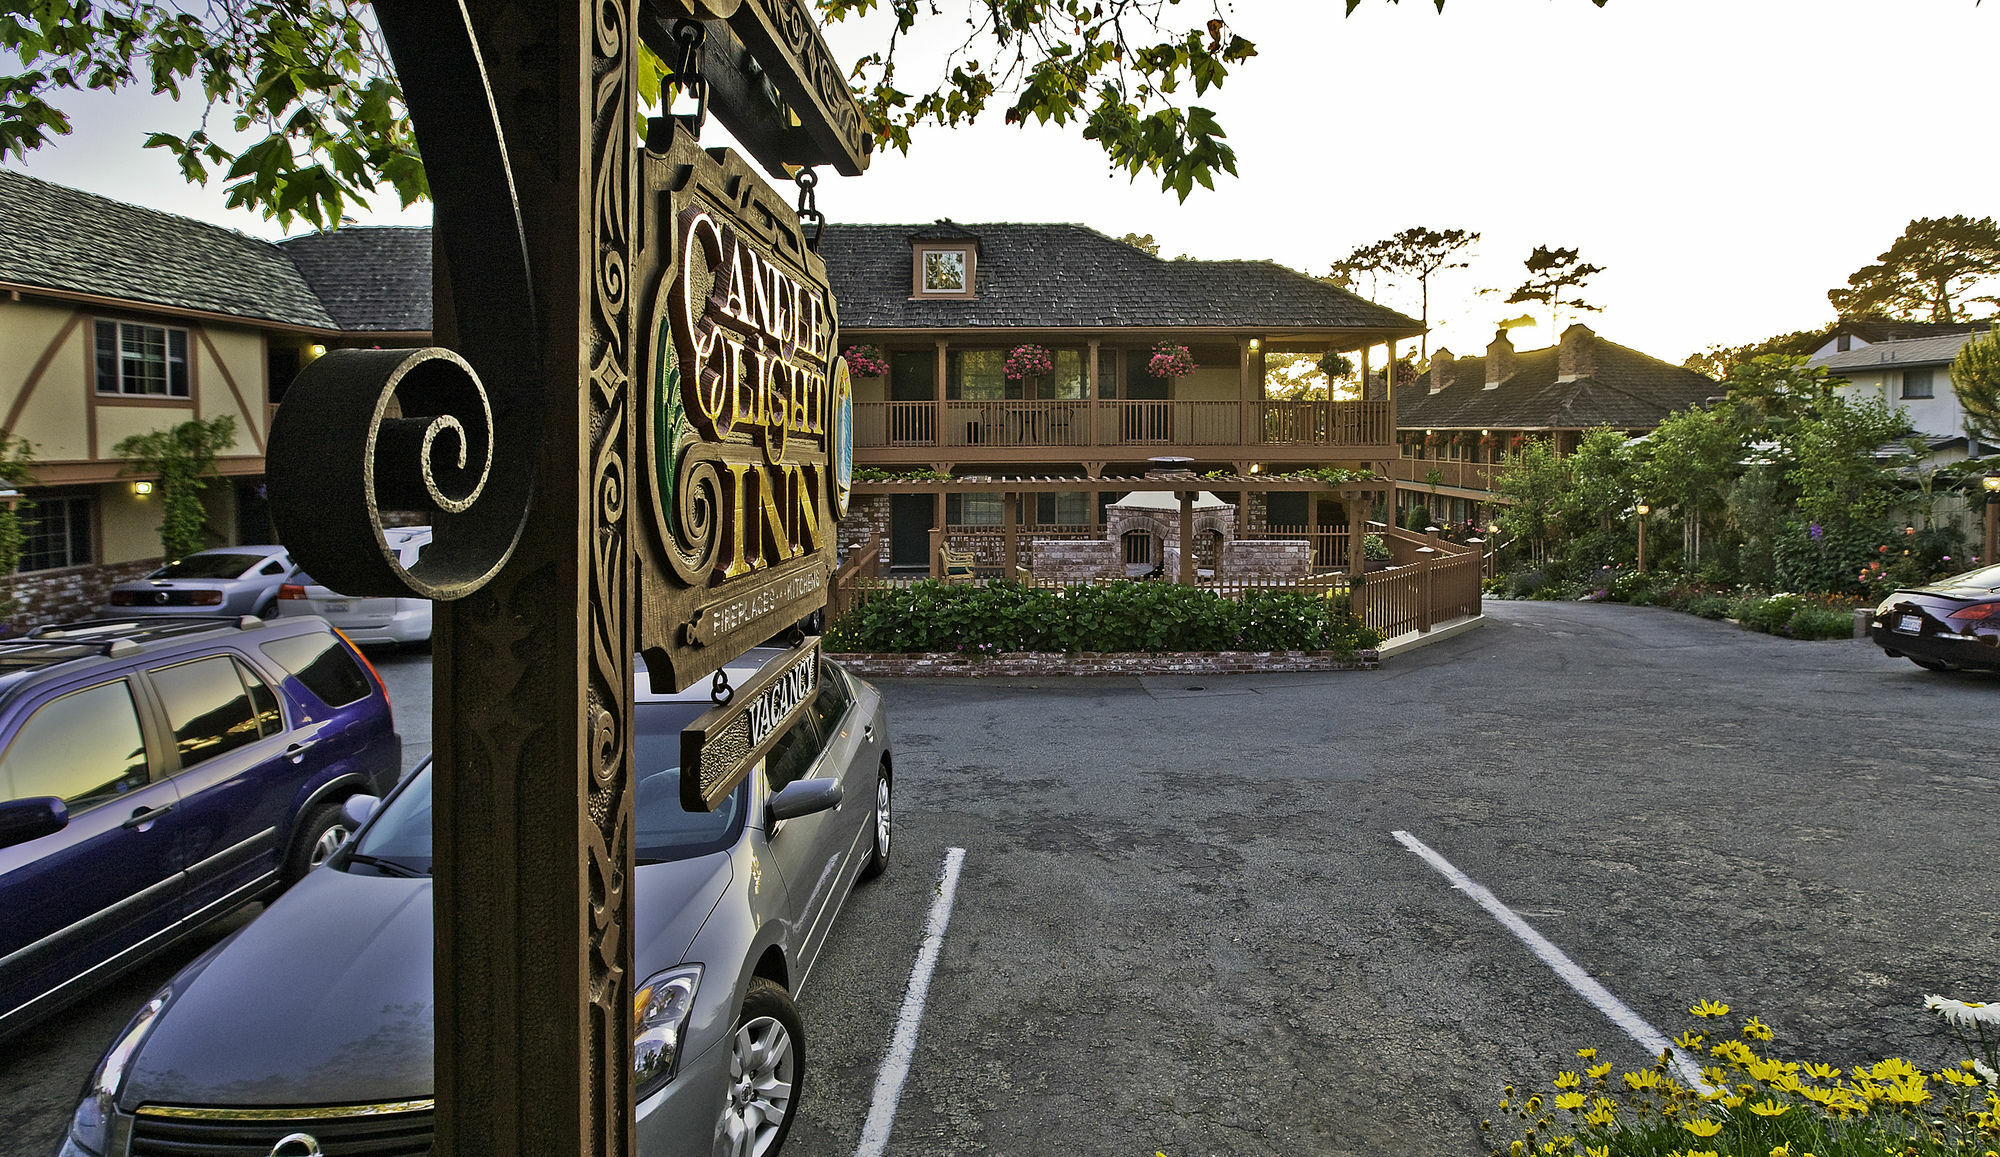 Candle Light Inn Carmel-by-the-Sea Exterior foto